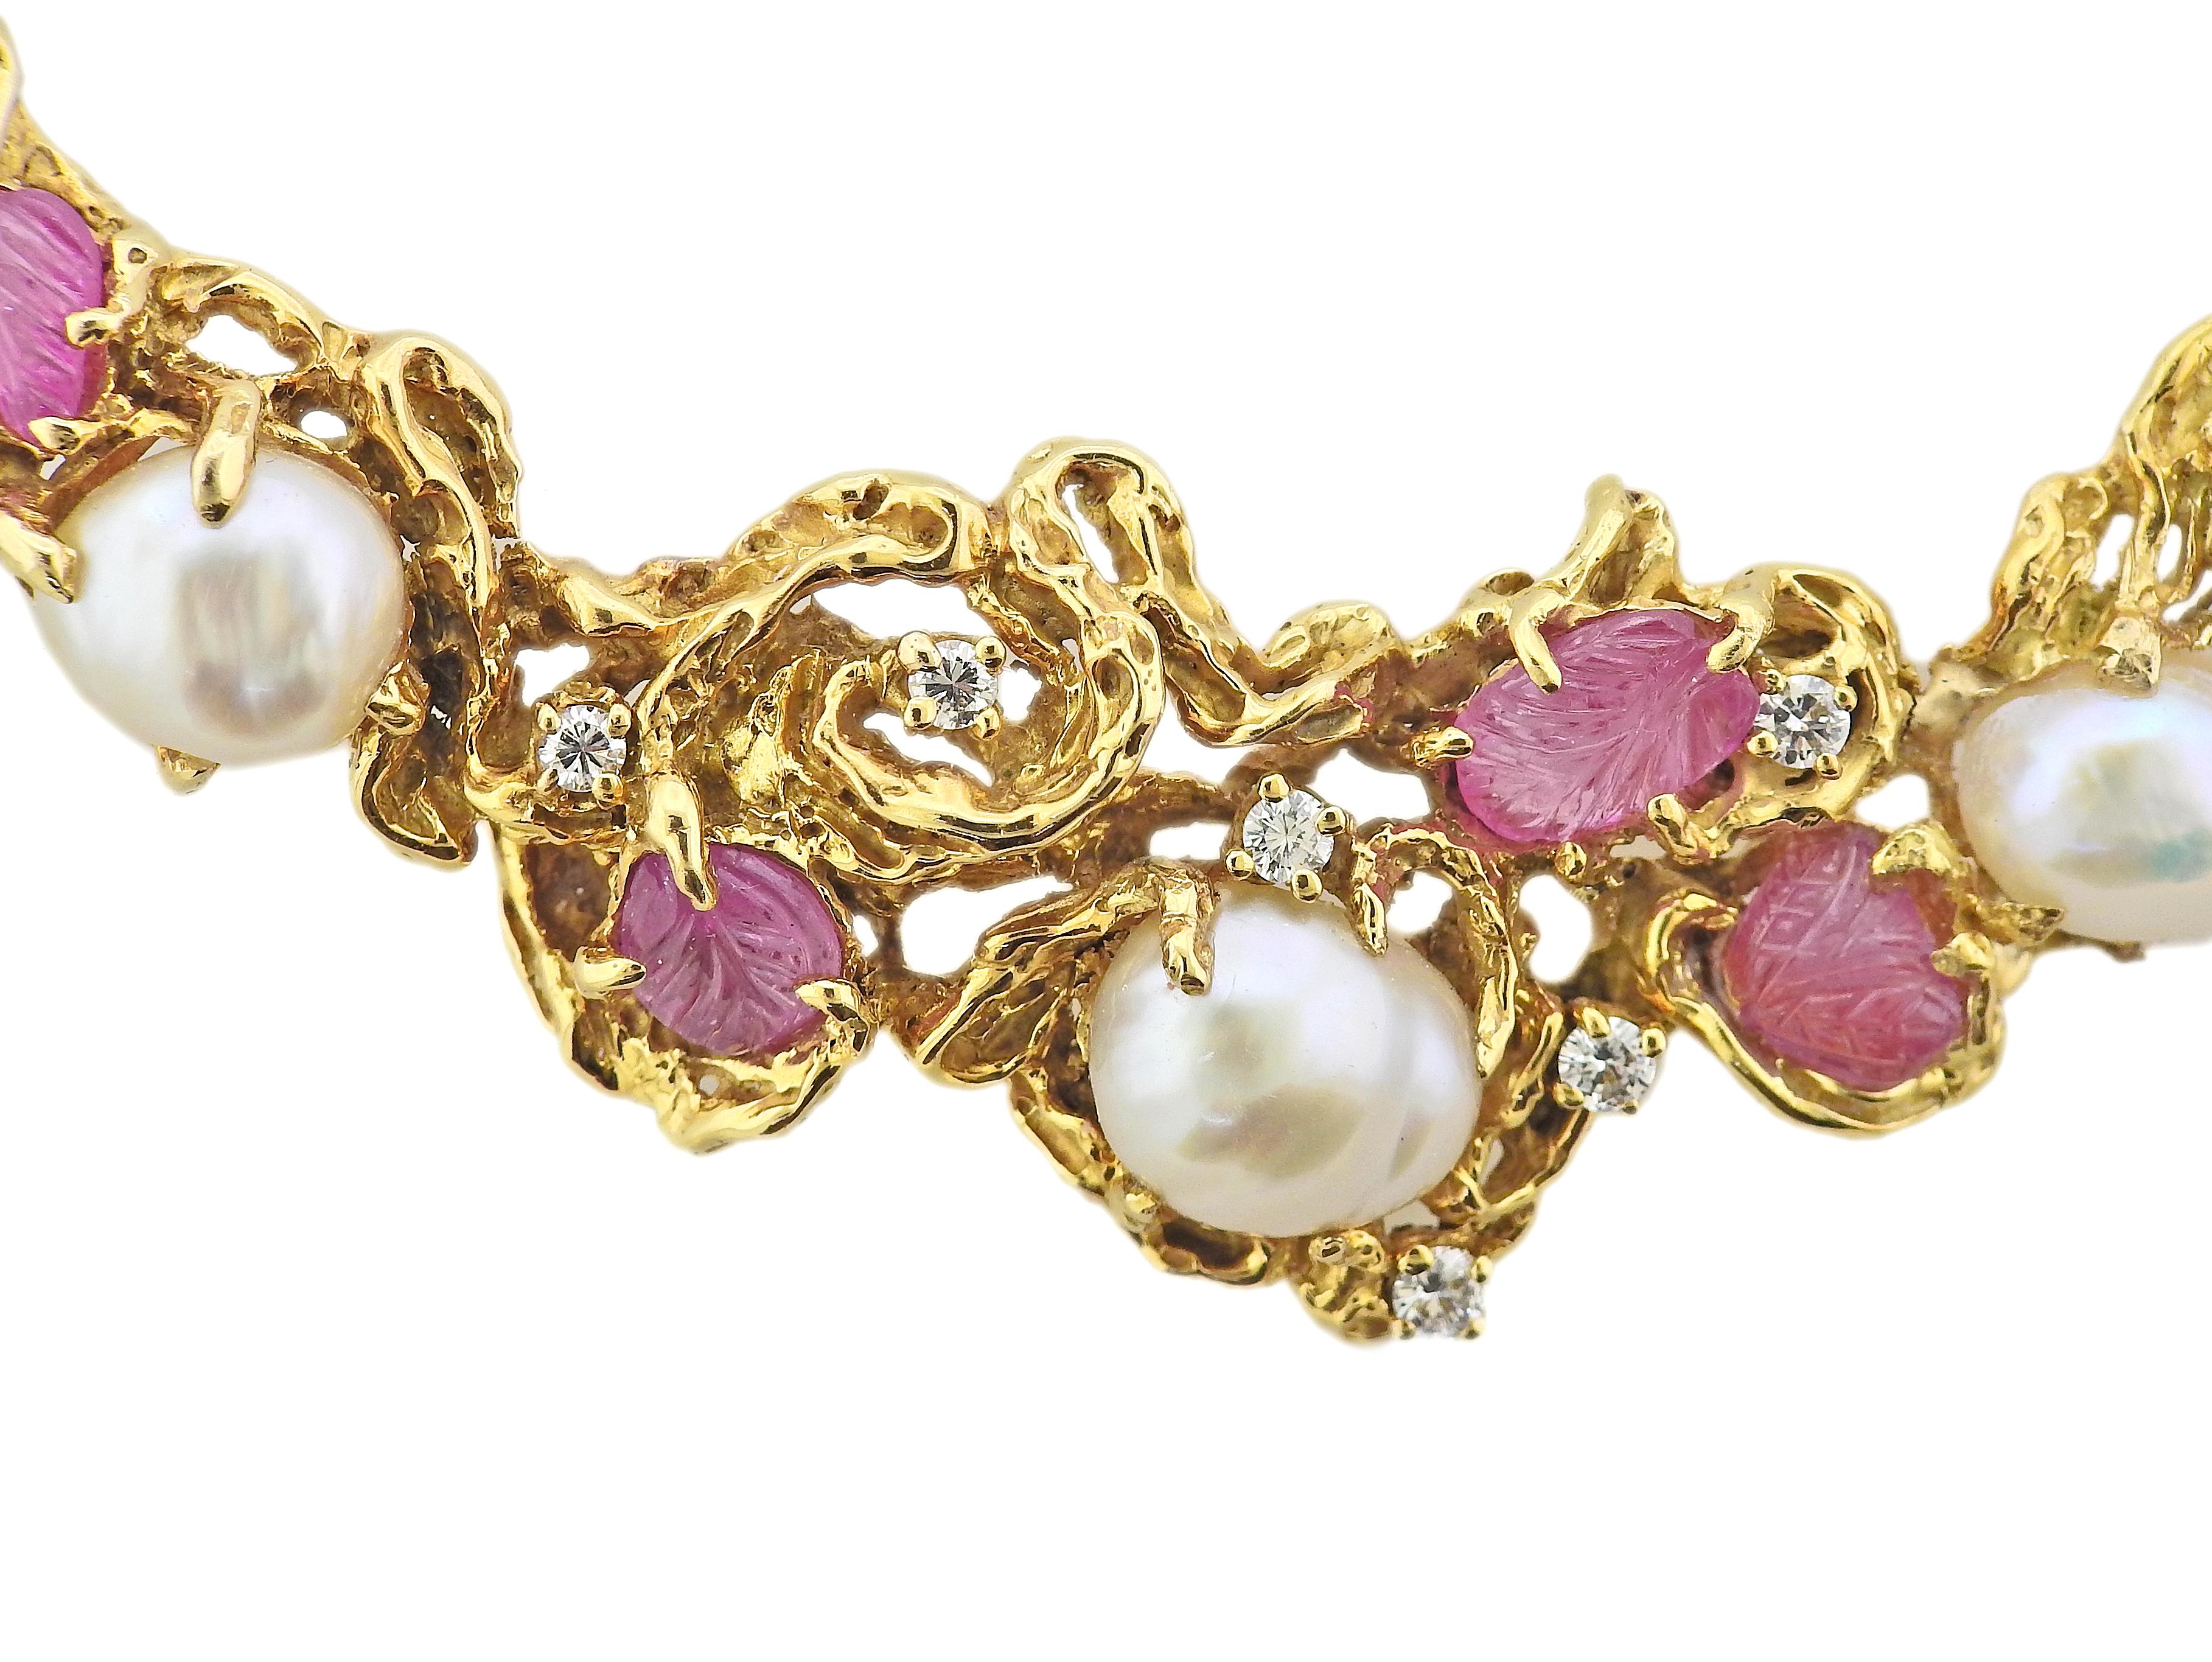 1970s vintage free form 18k gold necklace by Arthur King, with approx. 0.42ctw G/VS diamonds, pearls and carved pink tourmalines. Necklace measures 15.5